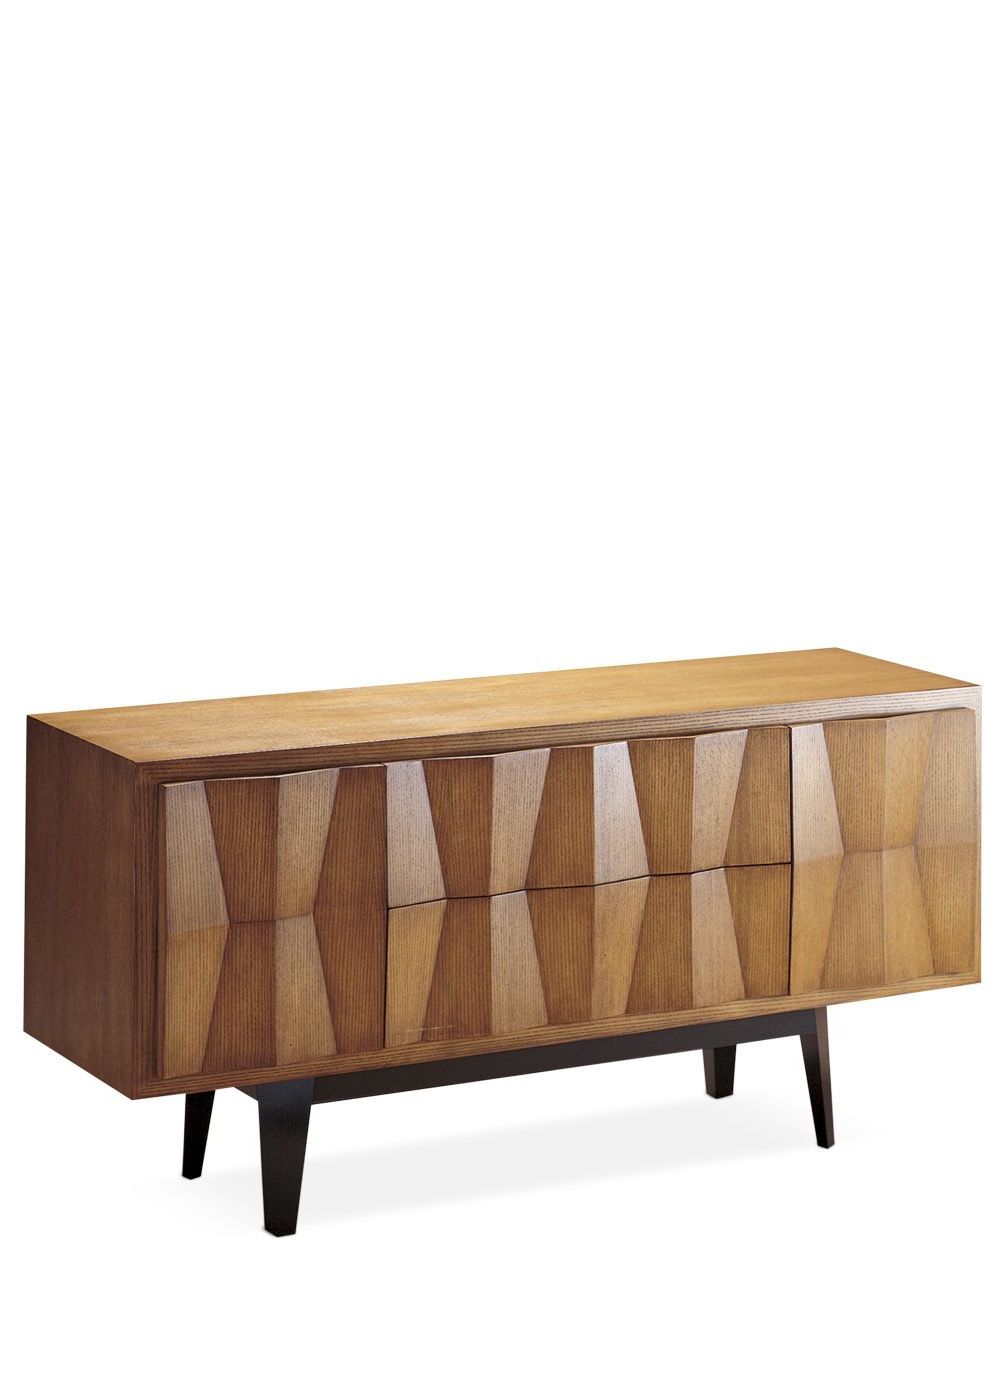 Edo Credenza (#t0308)therien | Chests & Commodes Regarding Womack Sideboards (View 9 of 20)